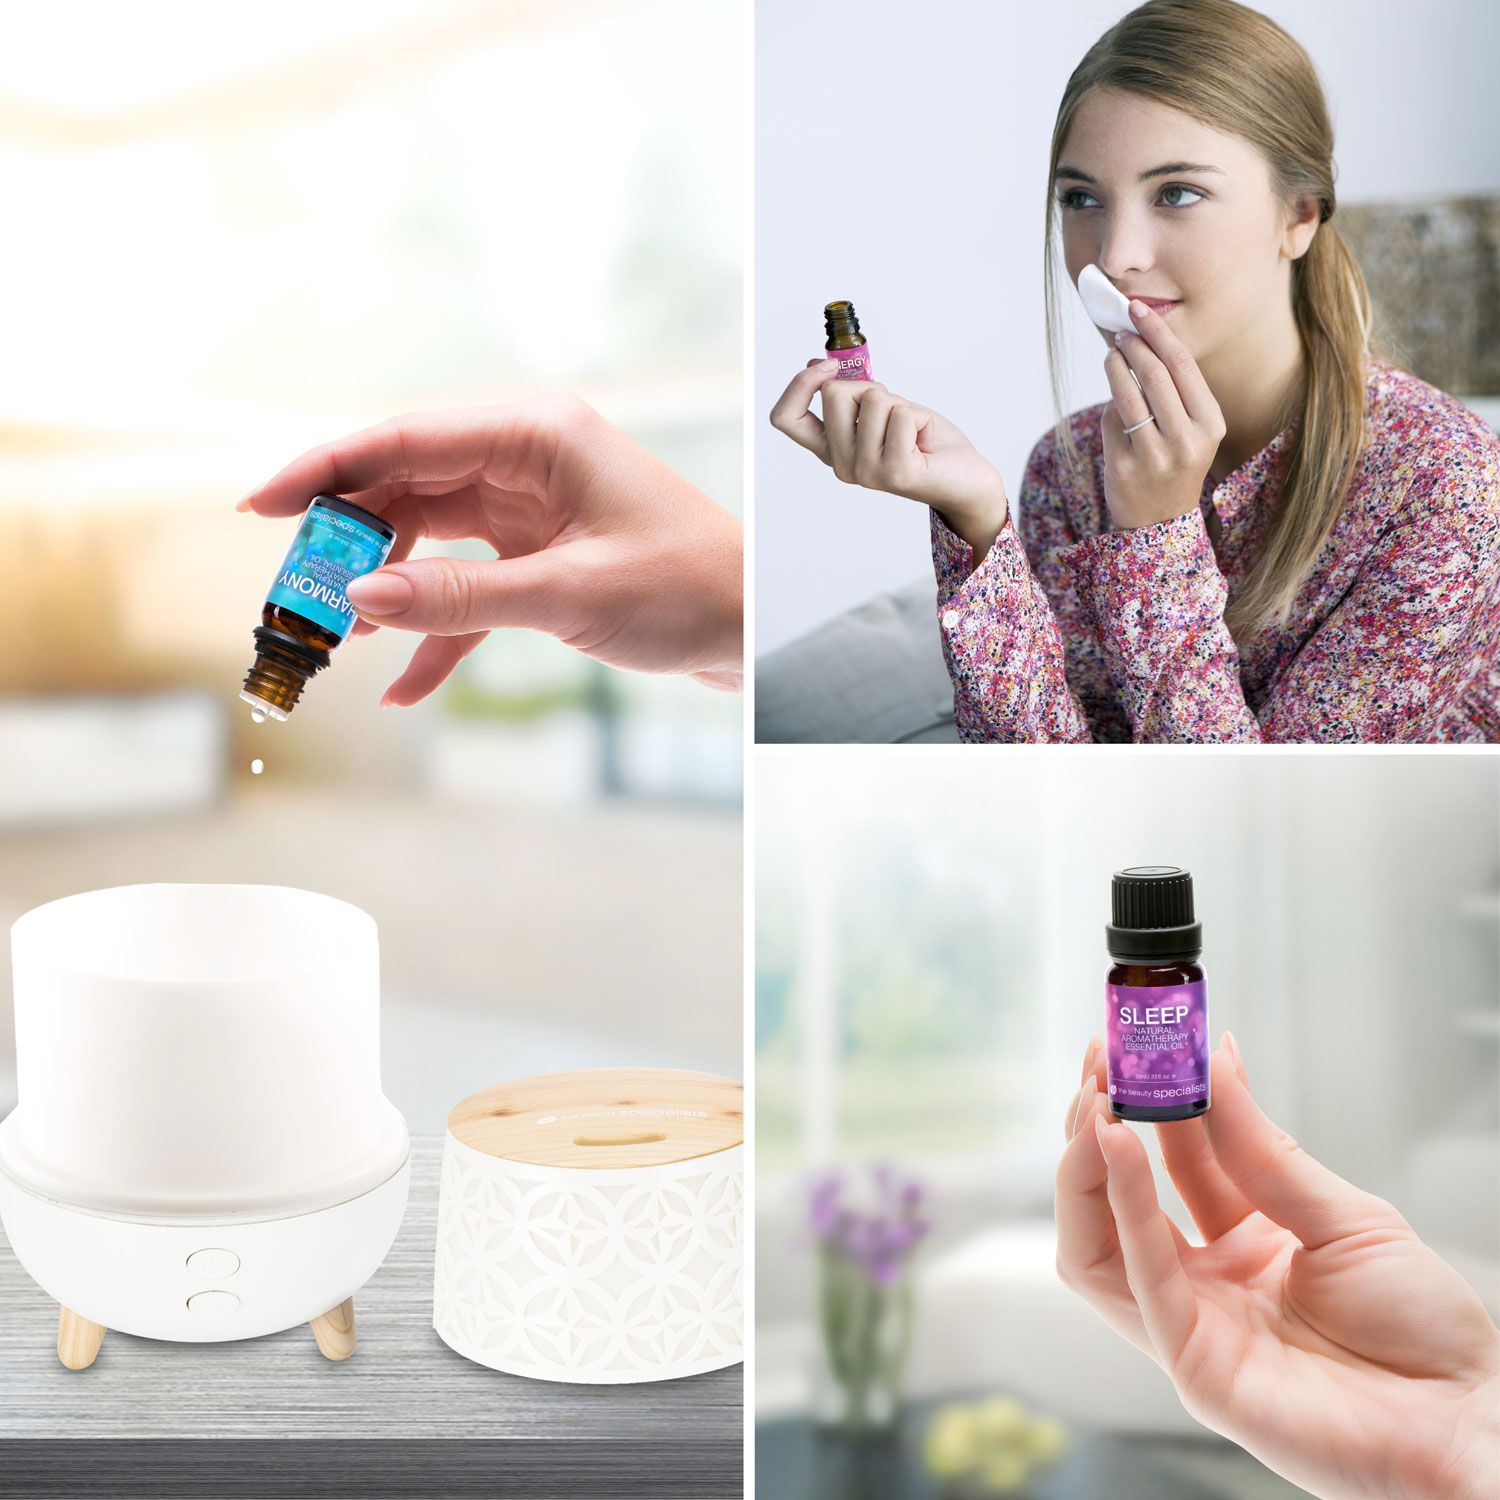 collage of images of the oils in use lady dispensing harmony oil into aroma diffuser a lady using relax oil on cotton pad to inhale ladys hand holding sleep oil